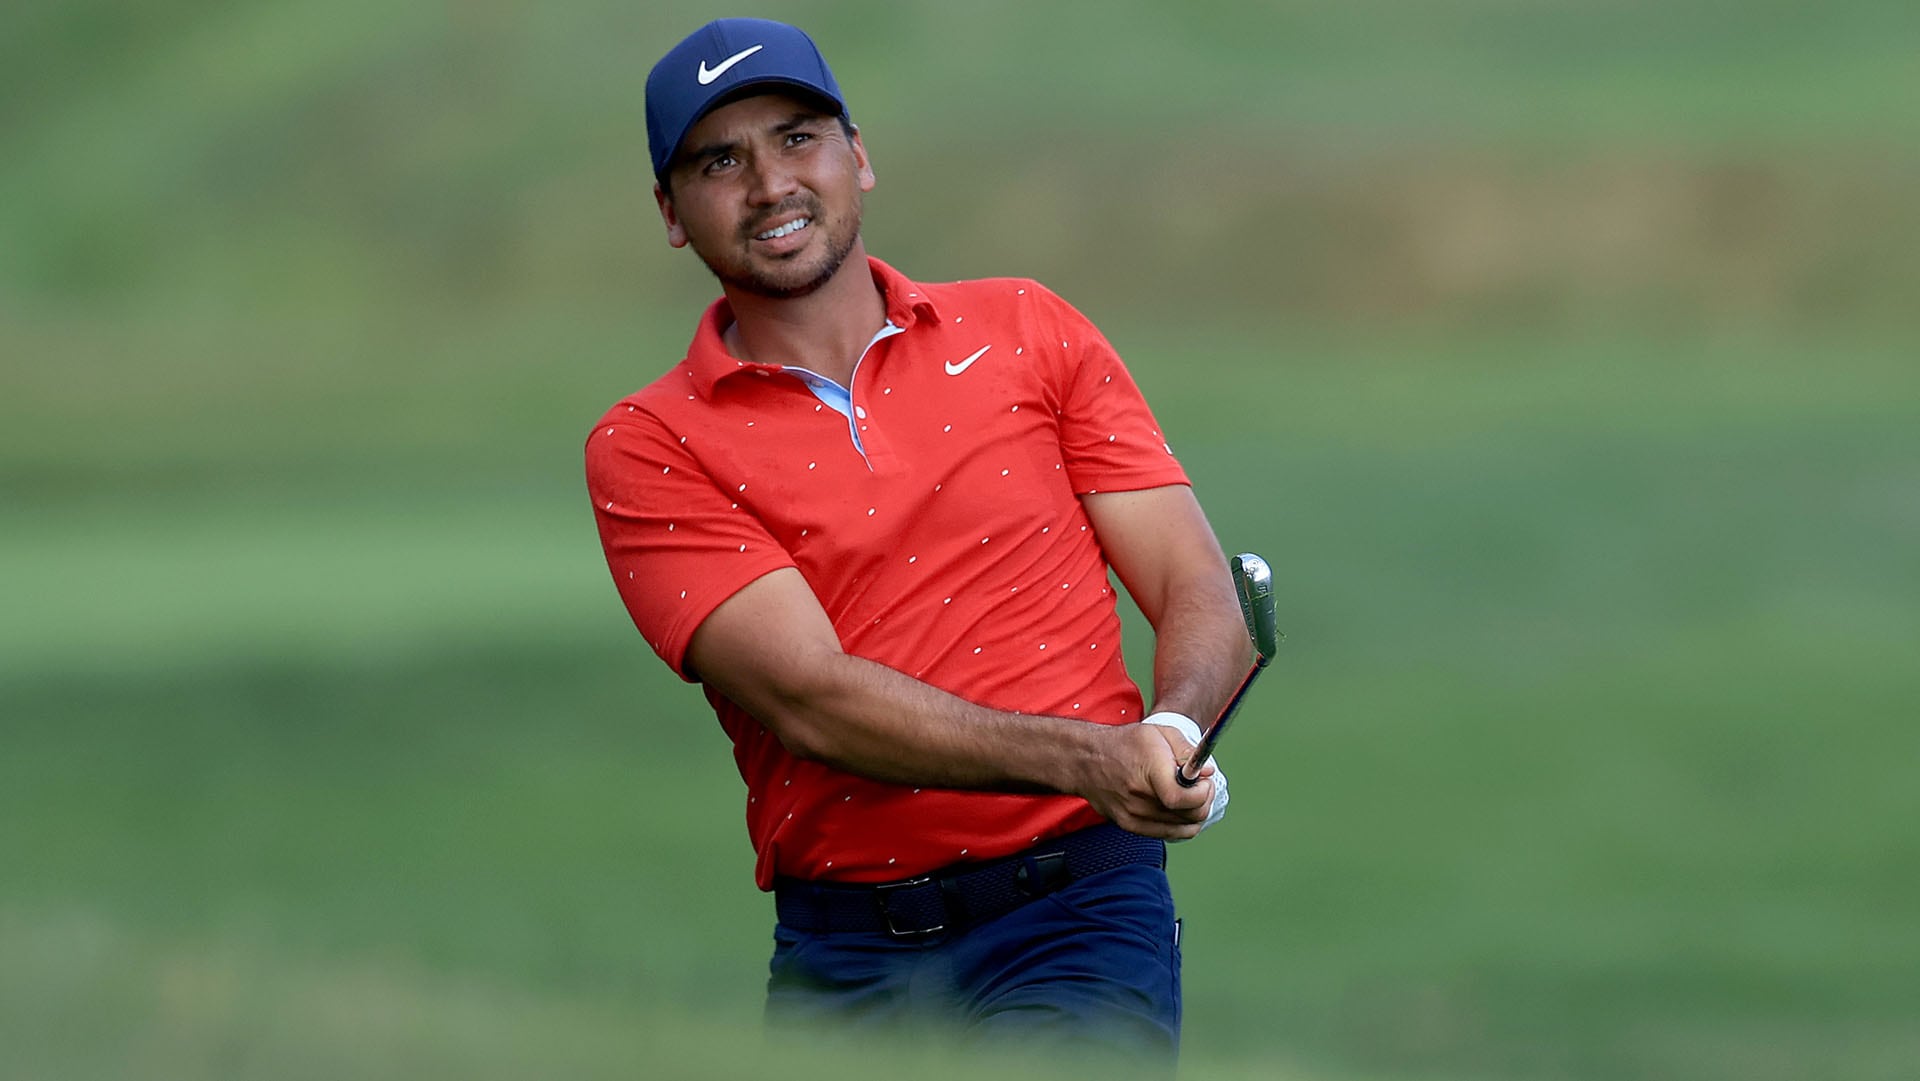 Jason Day ‘cautious’ of ongoing back issues; sympathizes with Tiger Woods